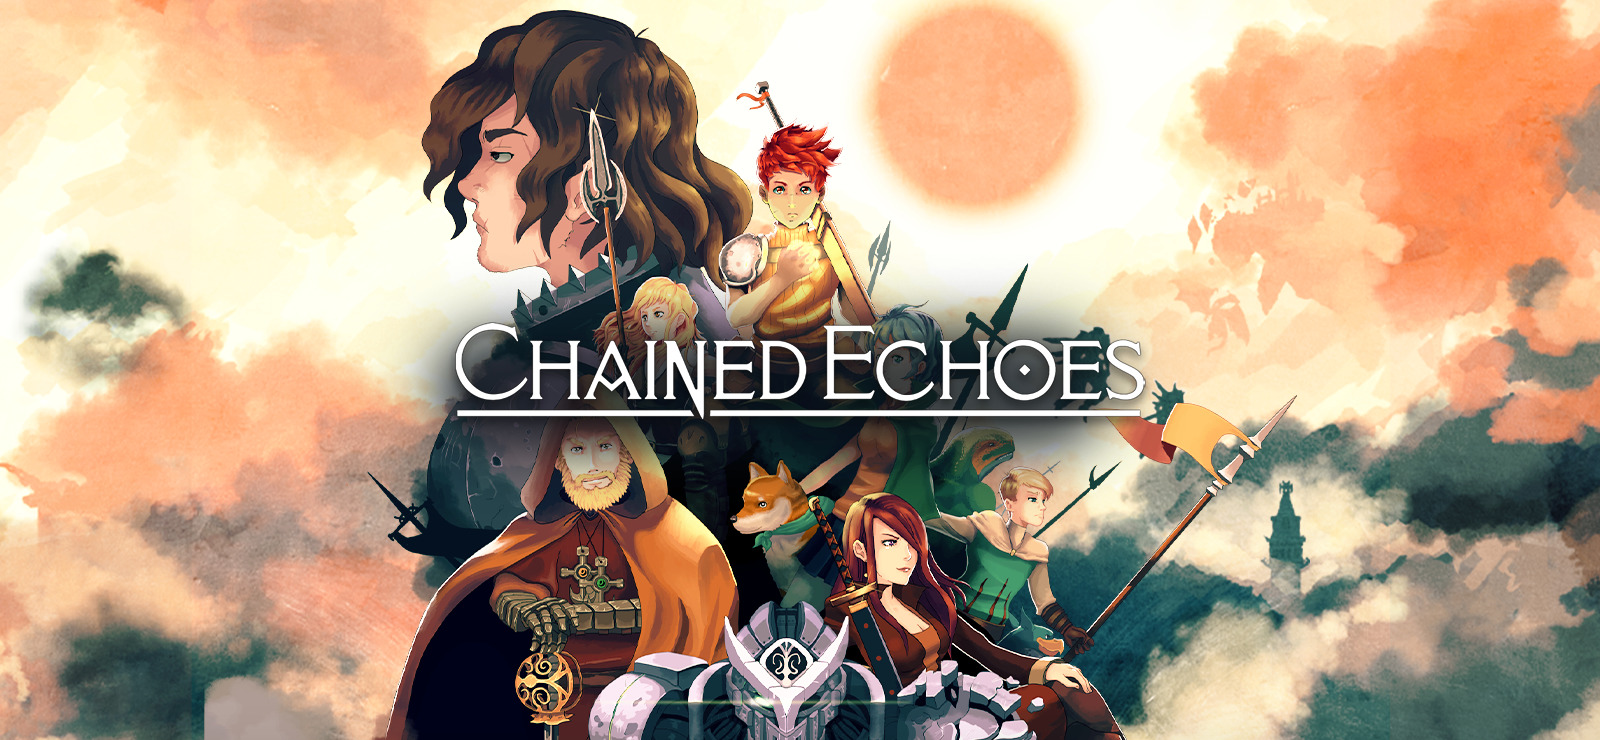 chained echoes canned download